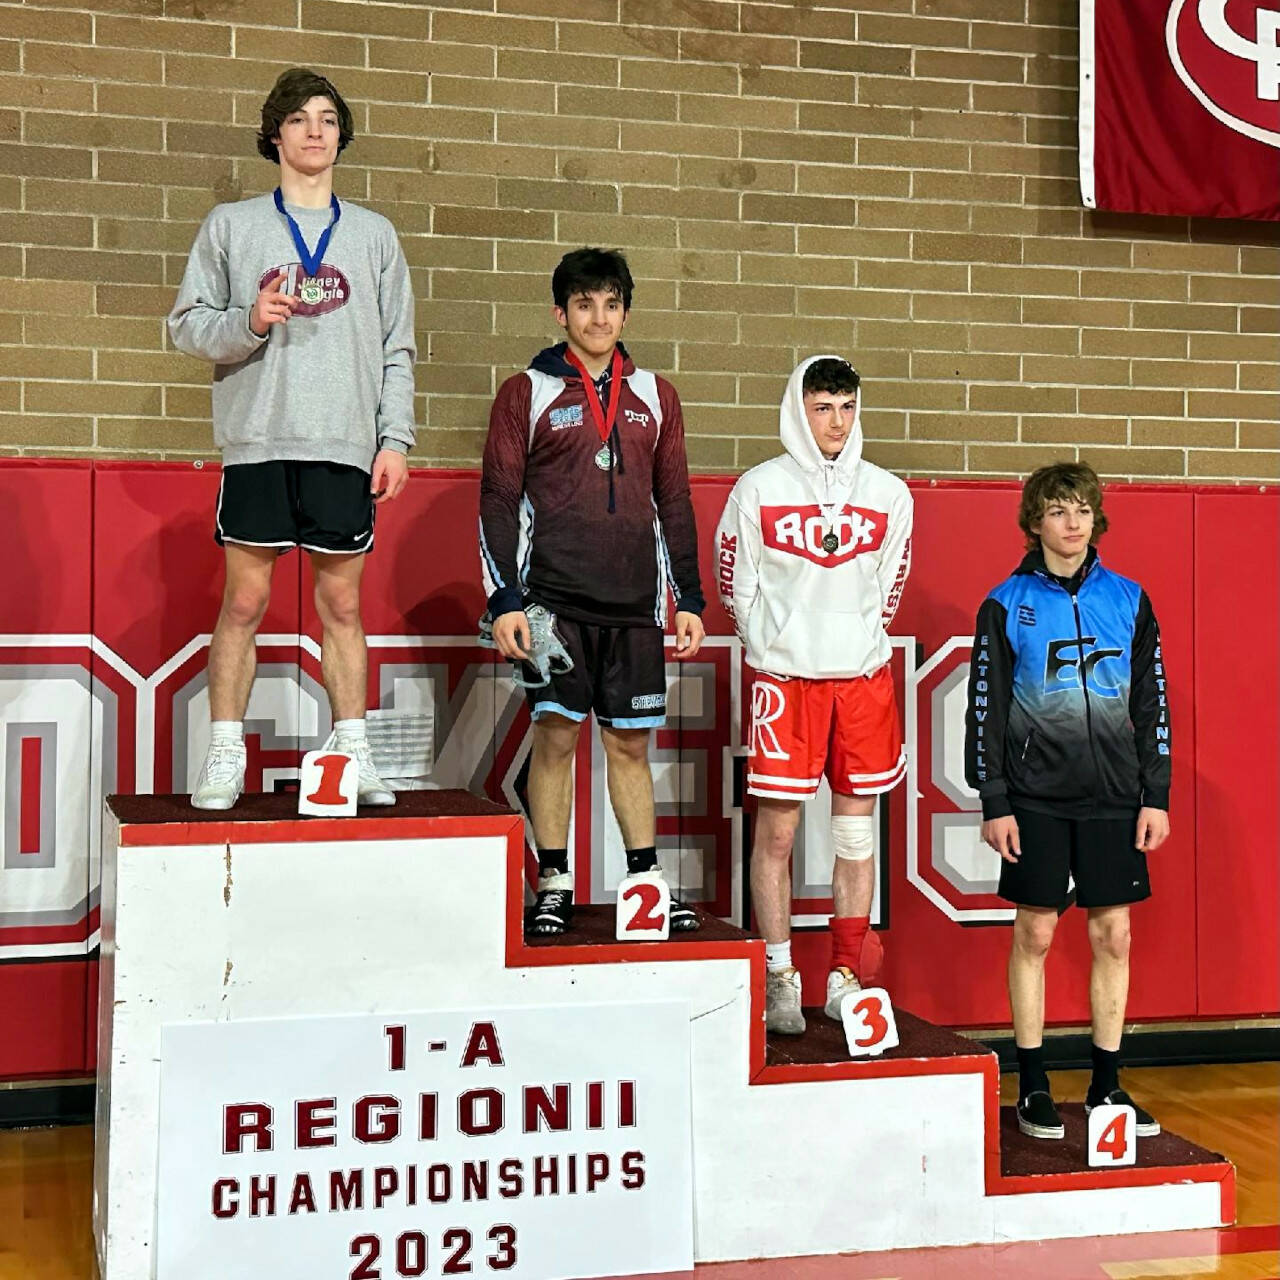 SUBMITTED PHOTO
Montesano’s Cole Ekerson, left, stands atop the podium after winning the 132-pound title at the 1A Region 3 Championships on Saturday at Castle Rock High School.